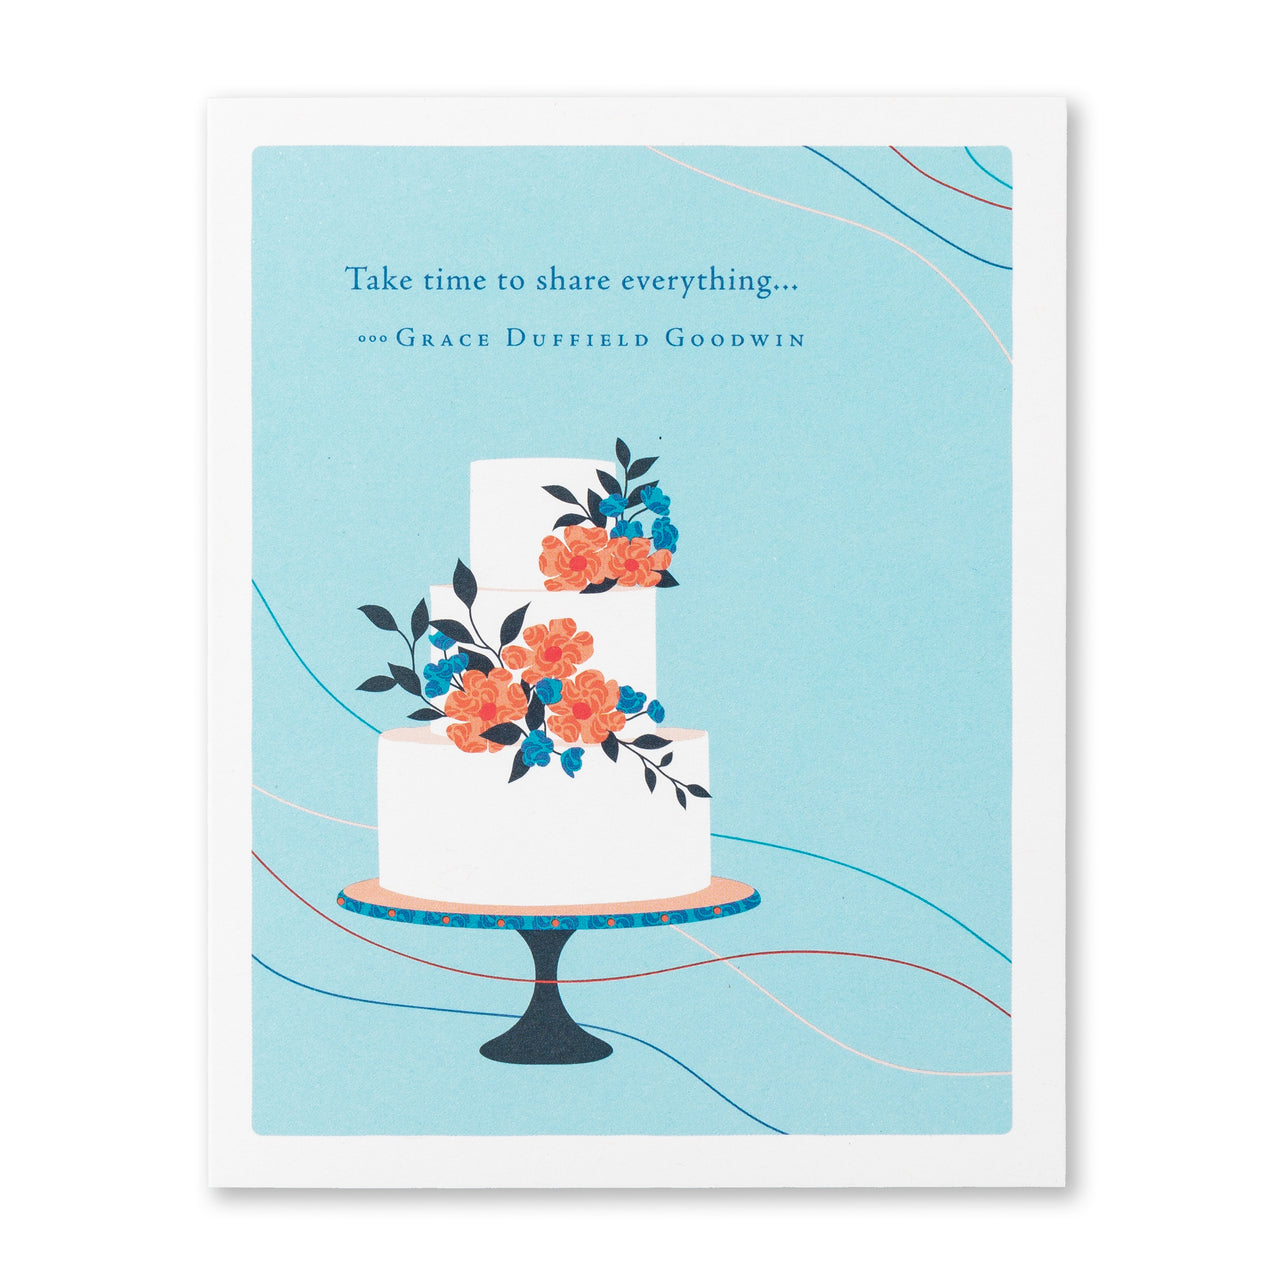 Positively Green Greeting Card - Wedding -  "Take Time to Share Everything..." - Grace Duffield Goodwin - Mellow Monkey